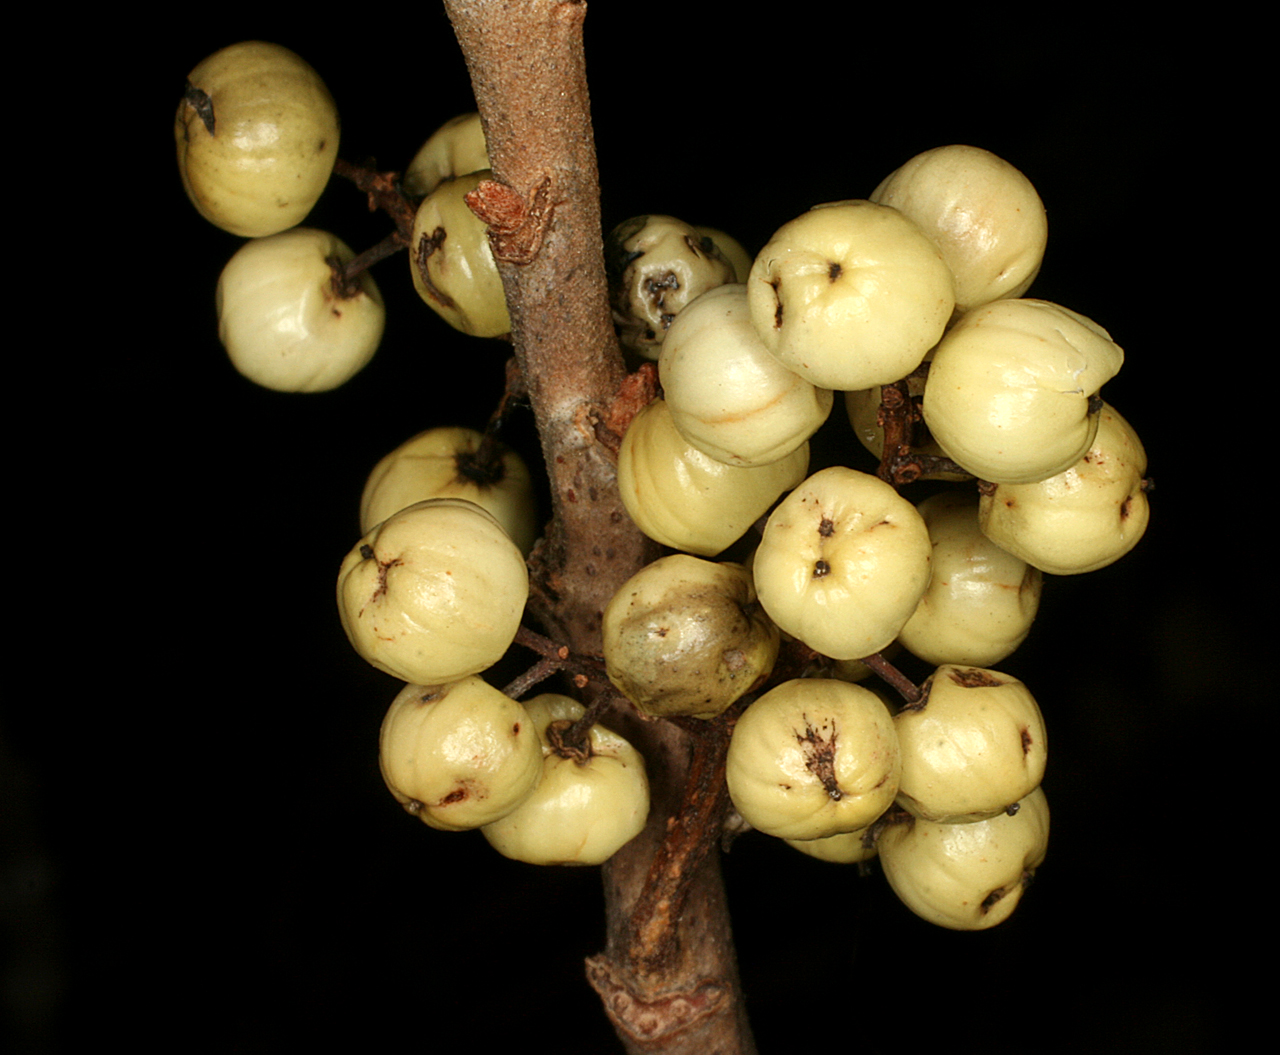 Close-up of fruits in a cluster along the stem. Also visible: buds and leaf scar (with five vascular bundles indicated by dots).